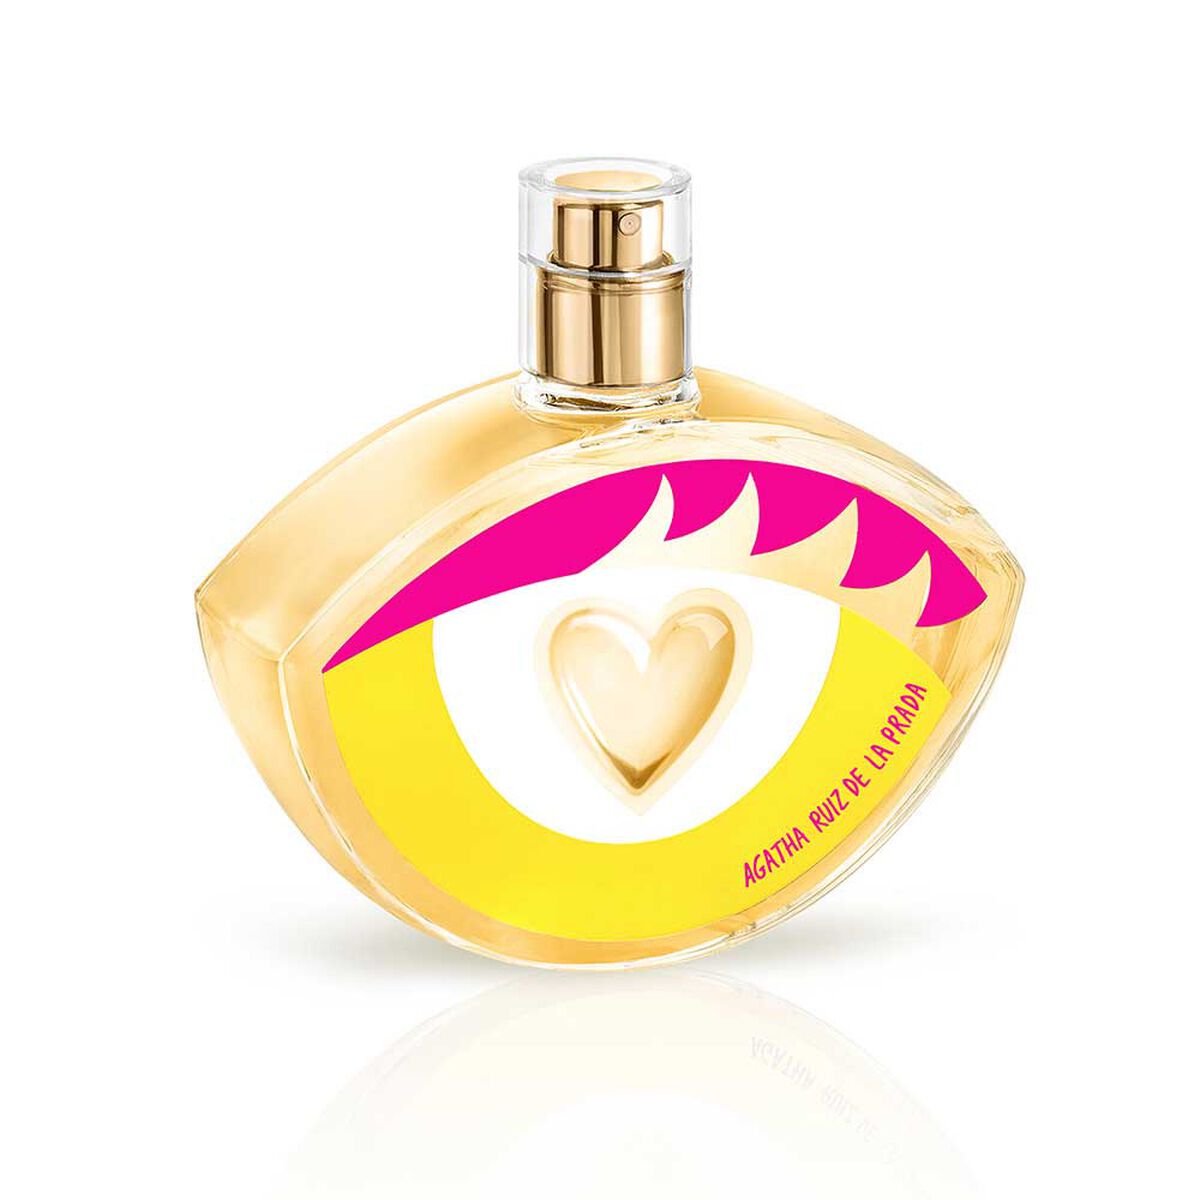 Look Gold Edt 80Ml Mujer